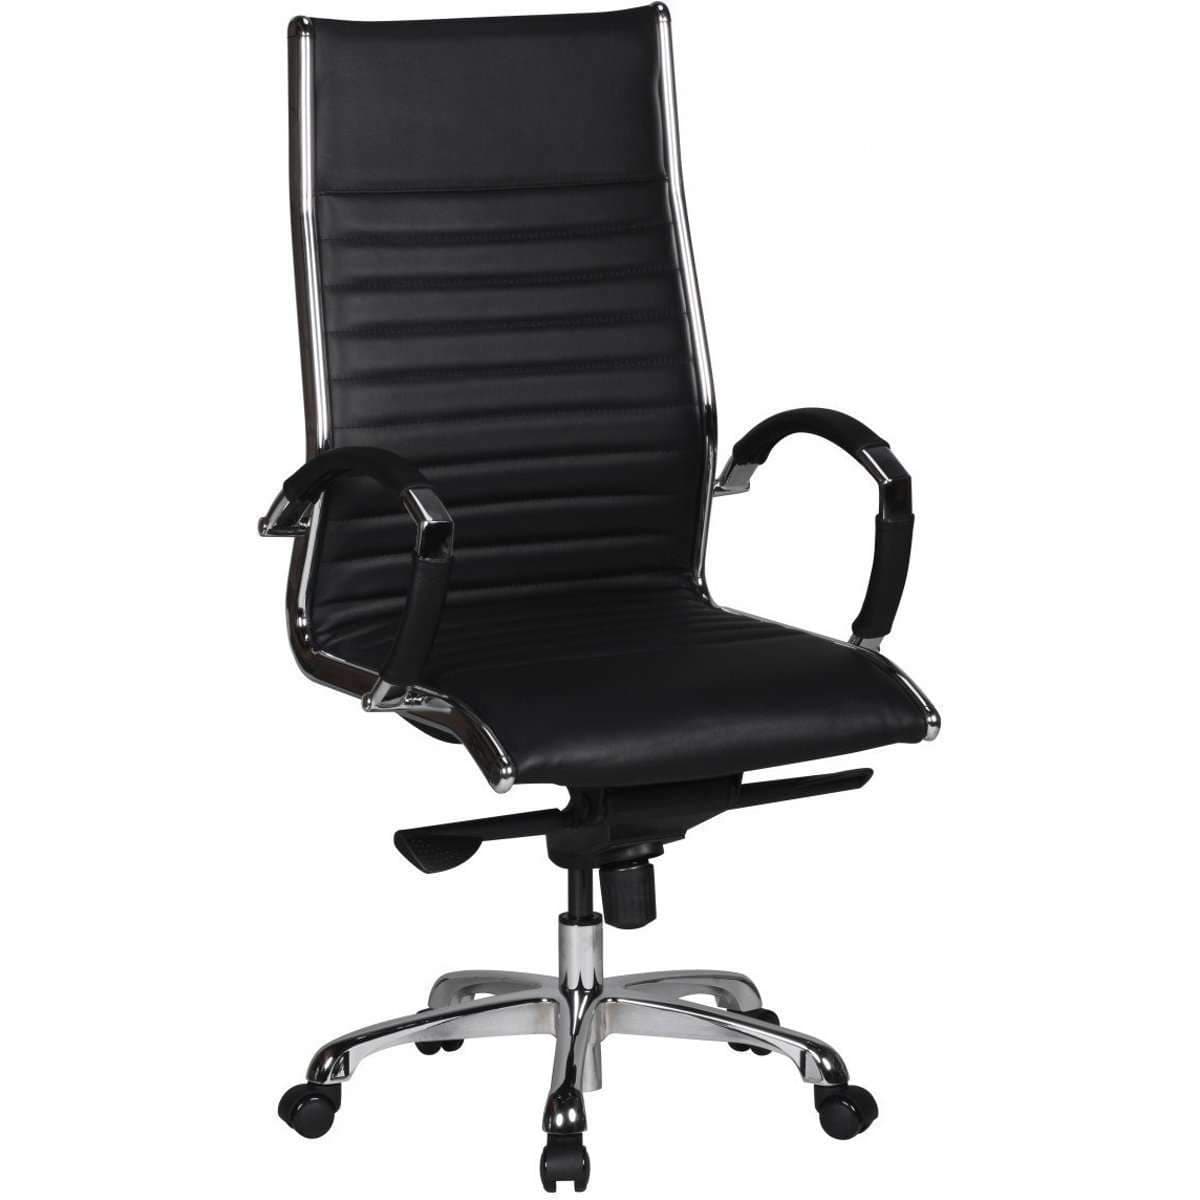 Nancy's Eastchester Leather Office Chair - Executive Chair - Ergonomic Swivel Chair - Office Chairs - Black/White/Caramel